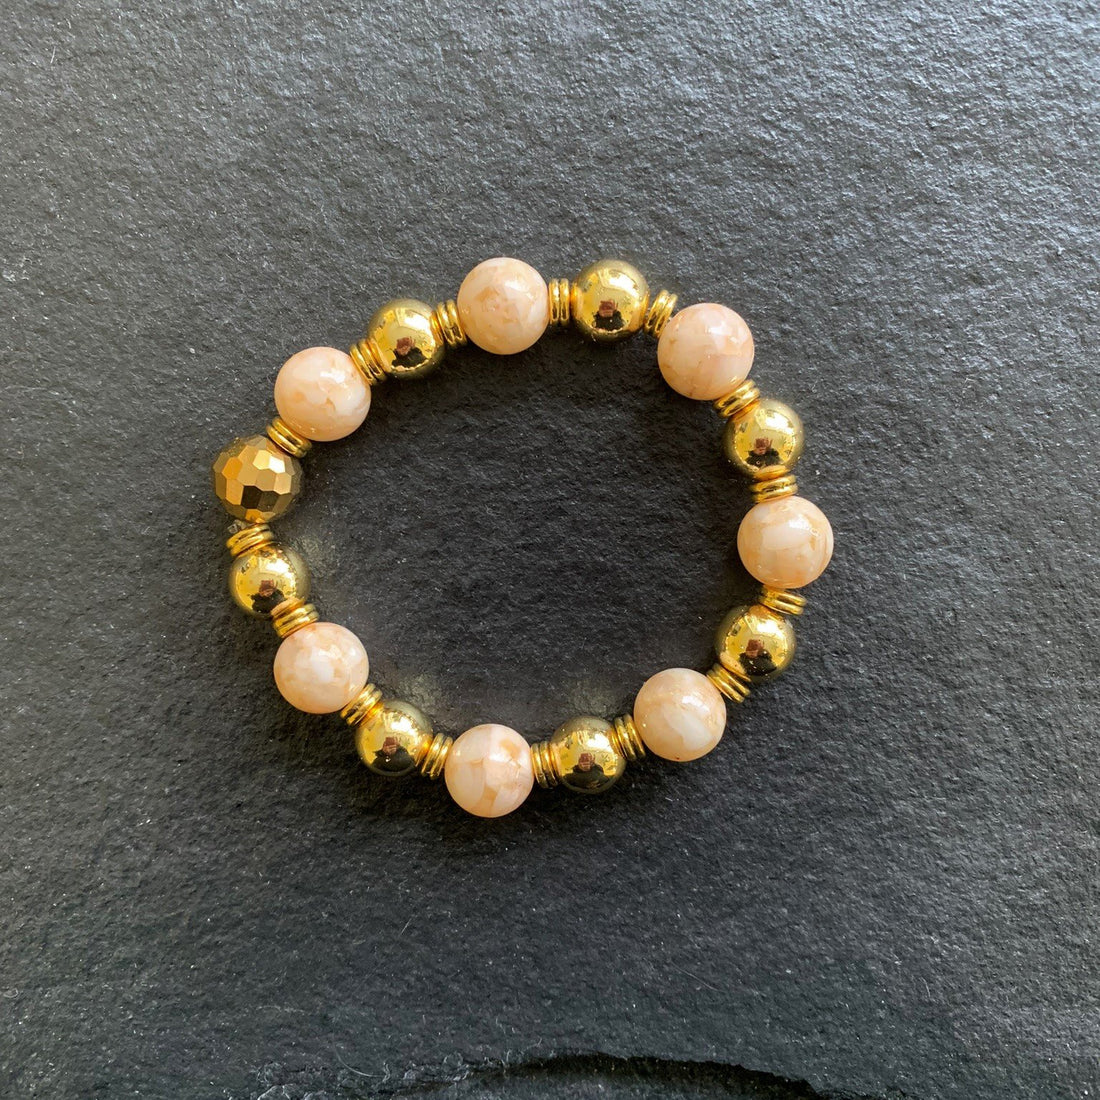 A bracelet made of Peach shell pearls with gold beads on elastic